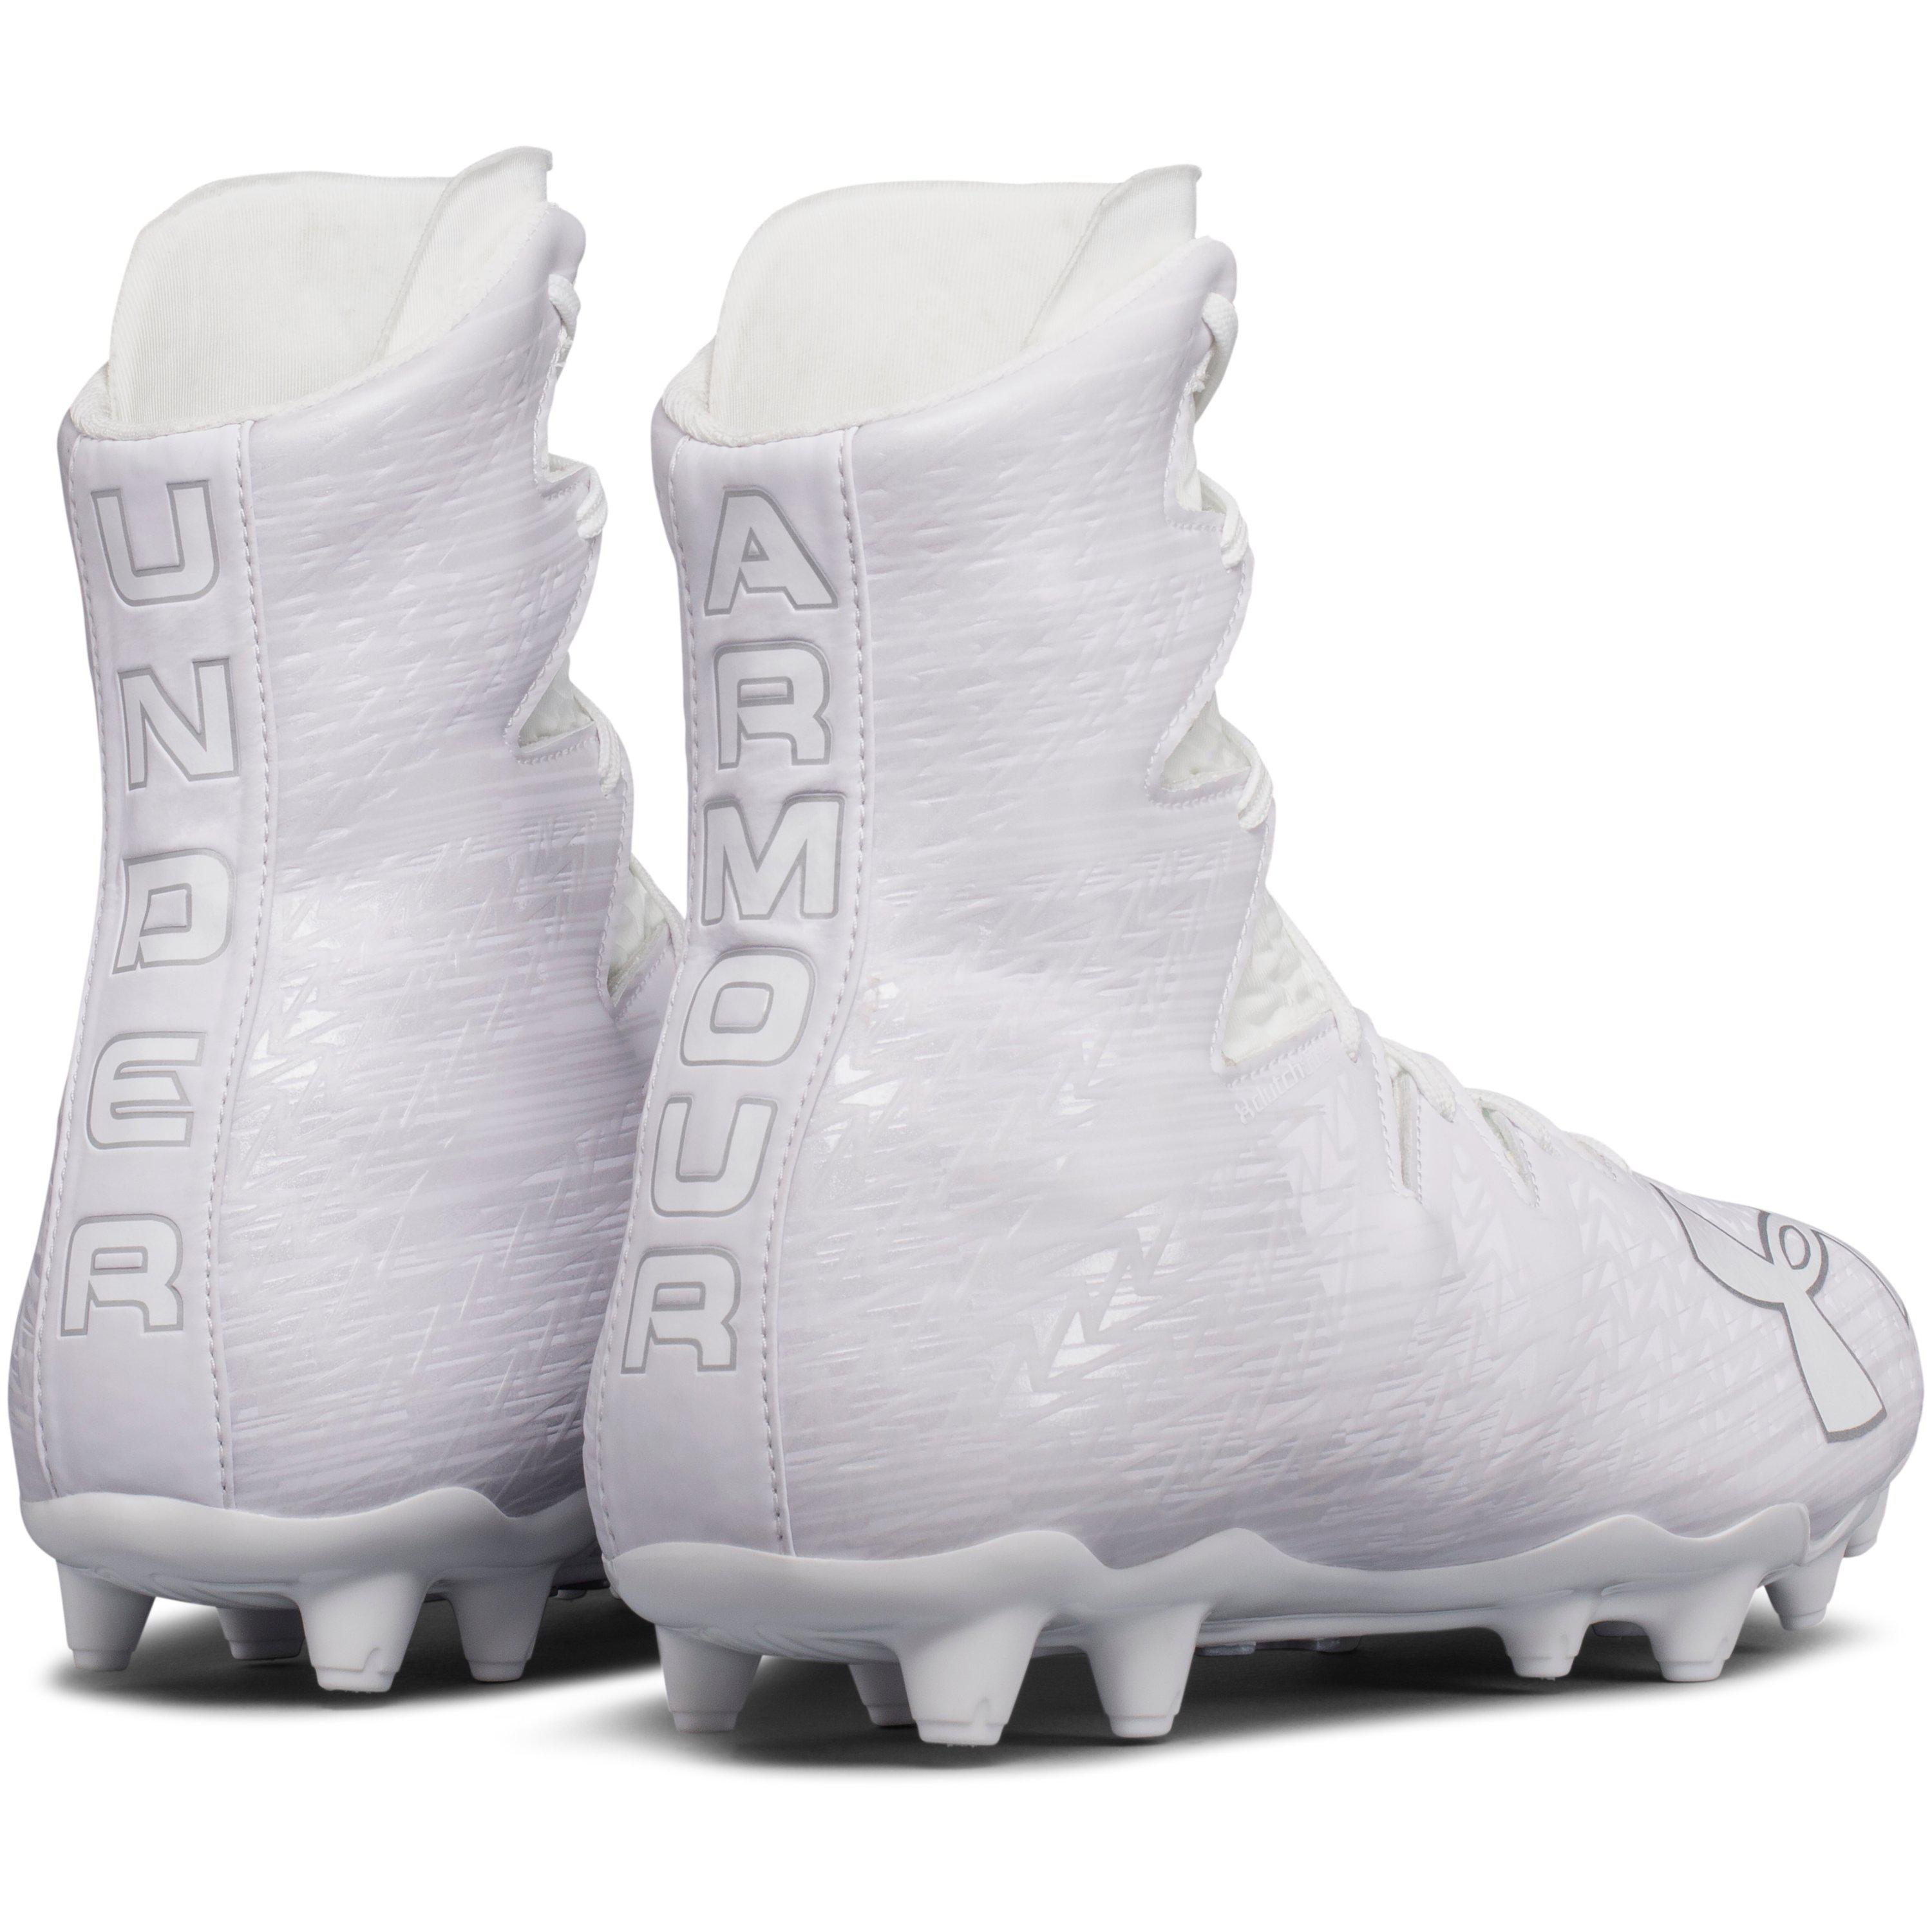 Details about   Mens Under Armour Highlight MC LE Lacrosse Football Size 8/9.5/10/10.5/11/11.5 